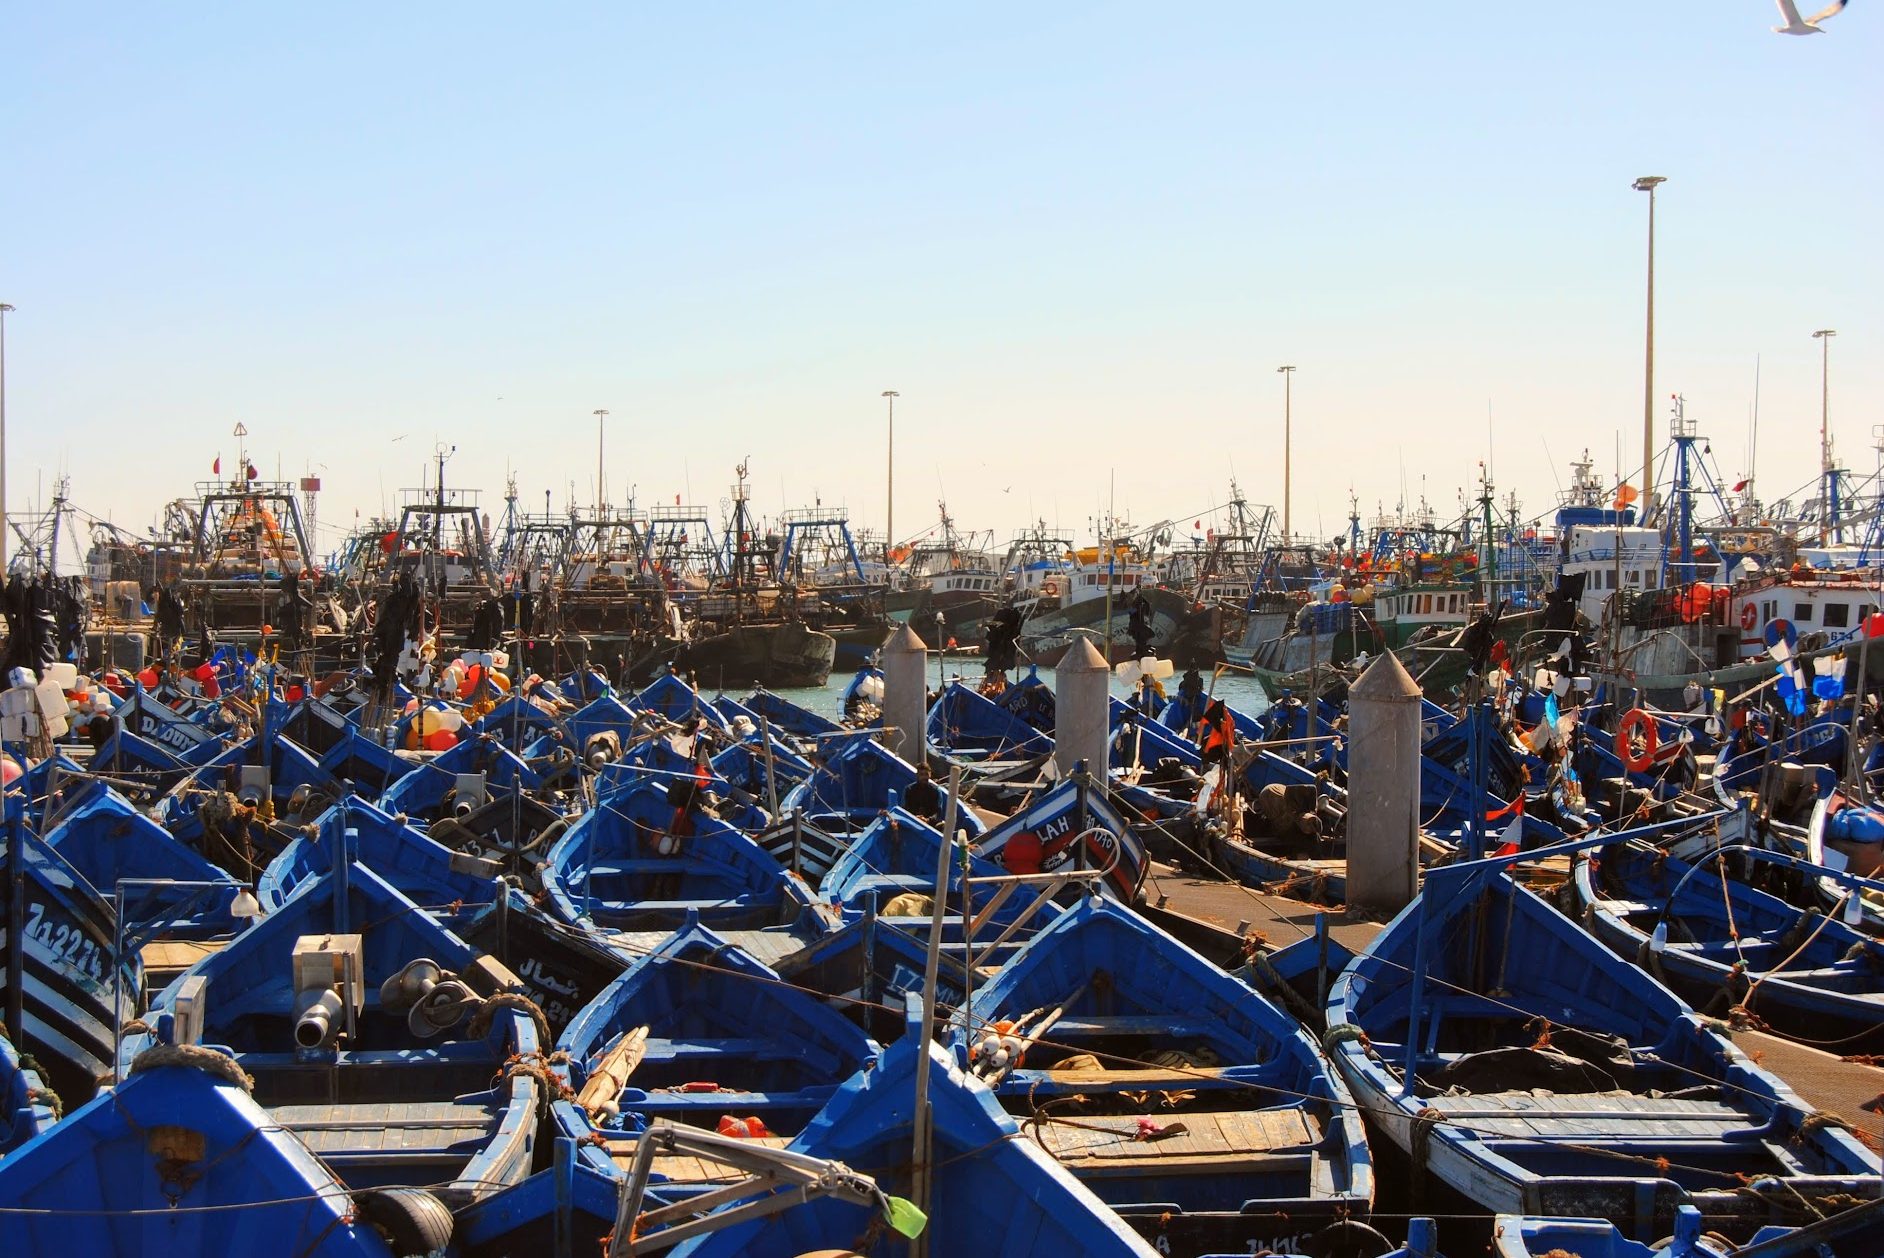 A harbor full of blue boats